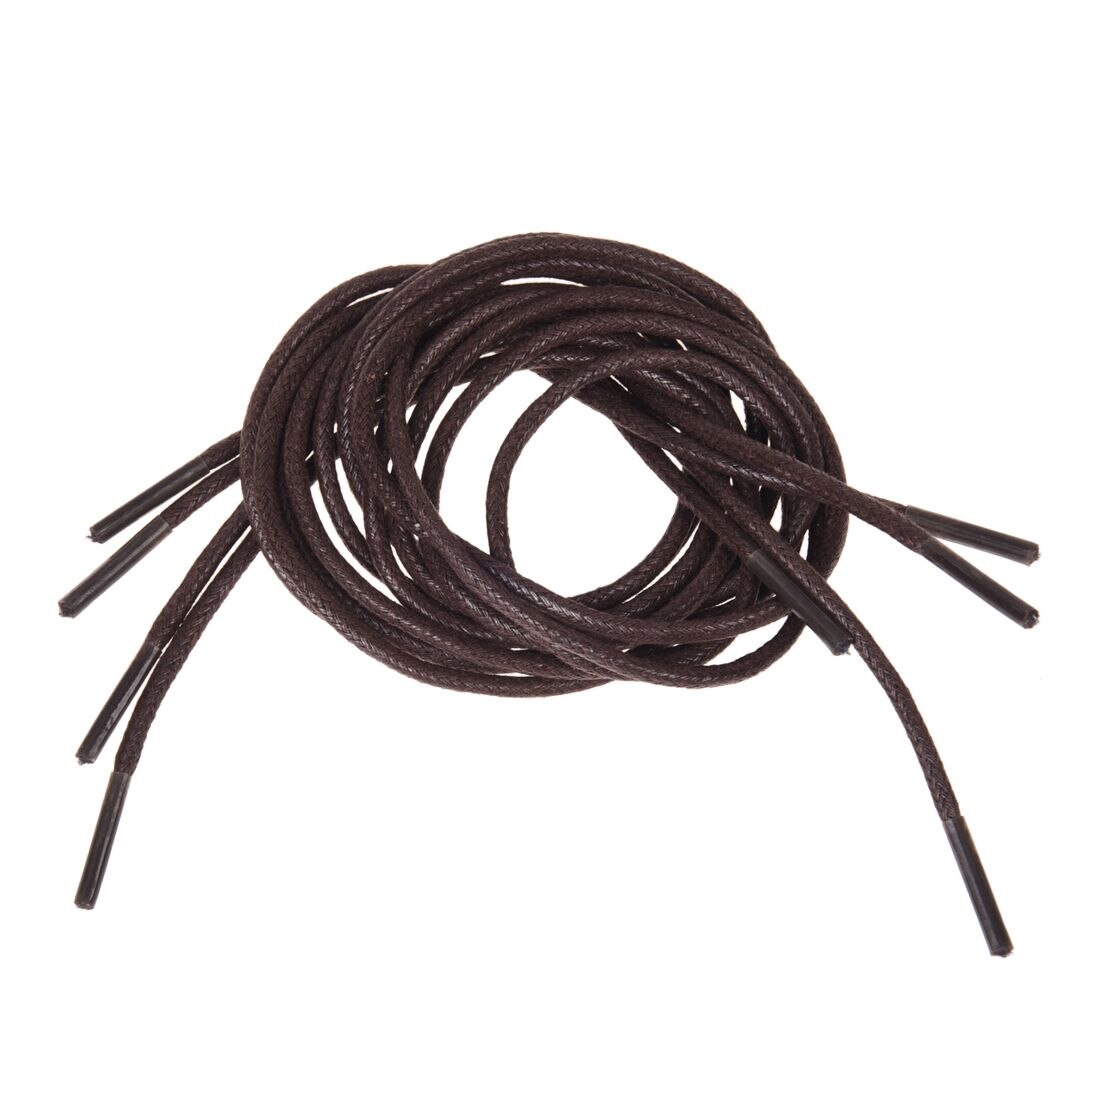 New  4 Pcs 69cm Brown Shoelace Shoestring for Leather Shoes - ebowsos